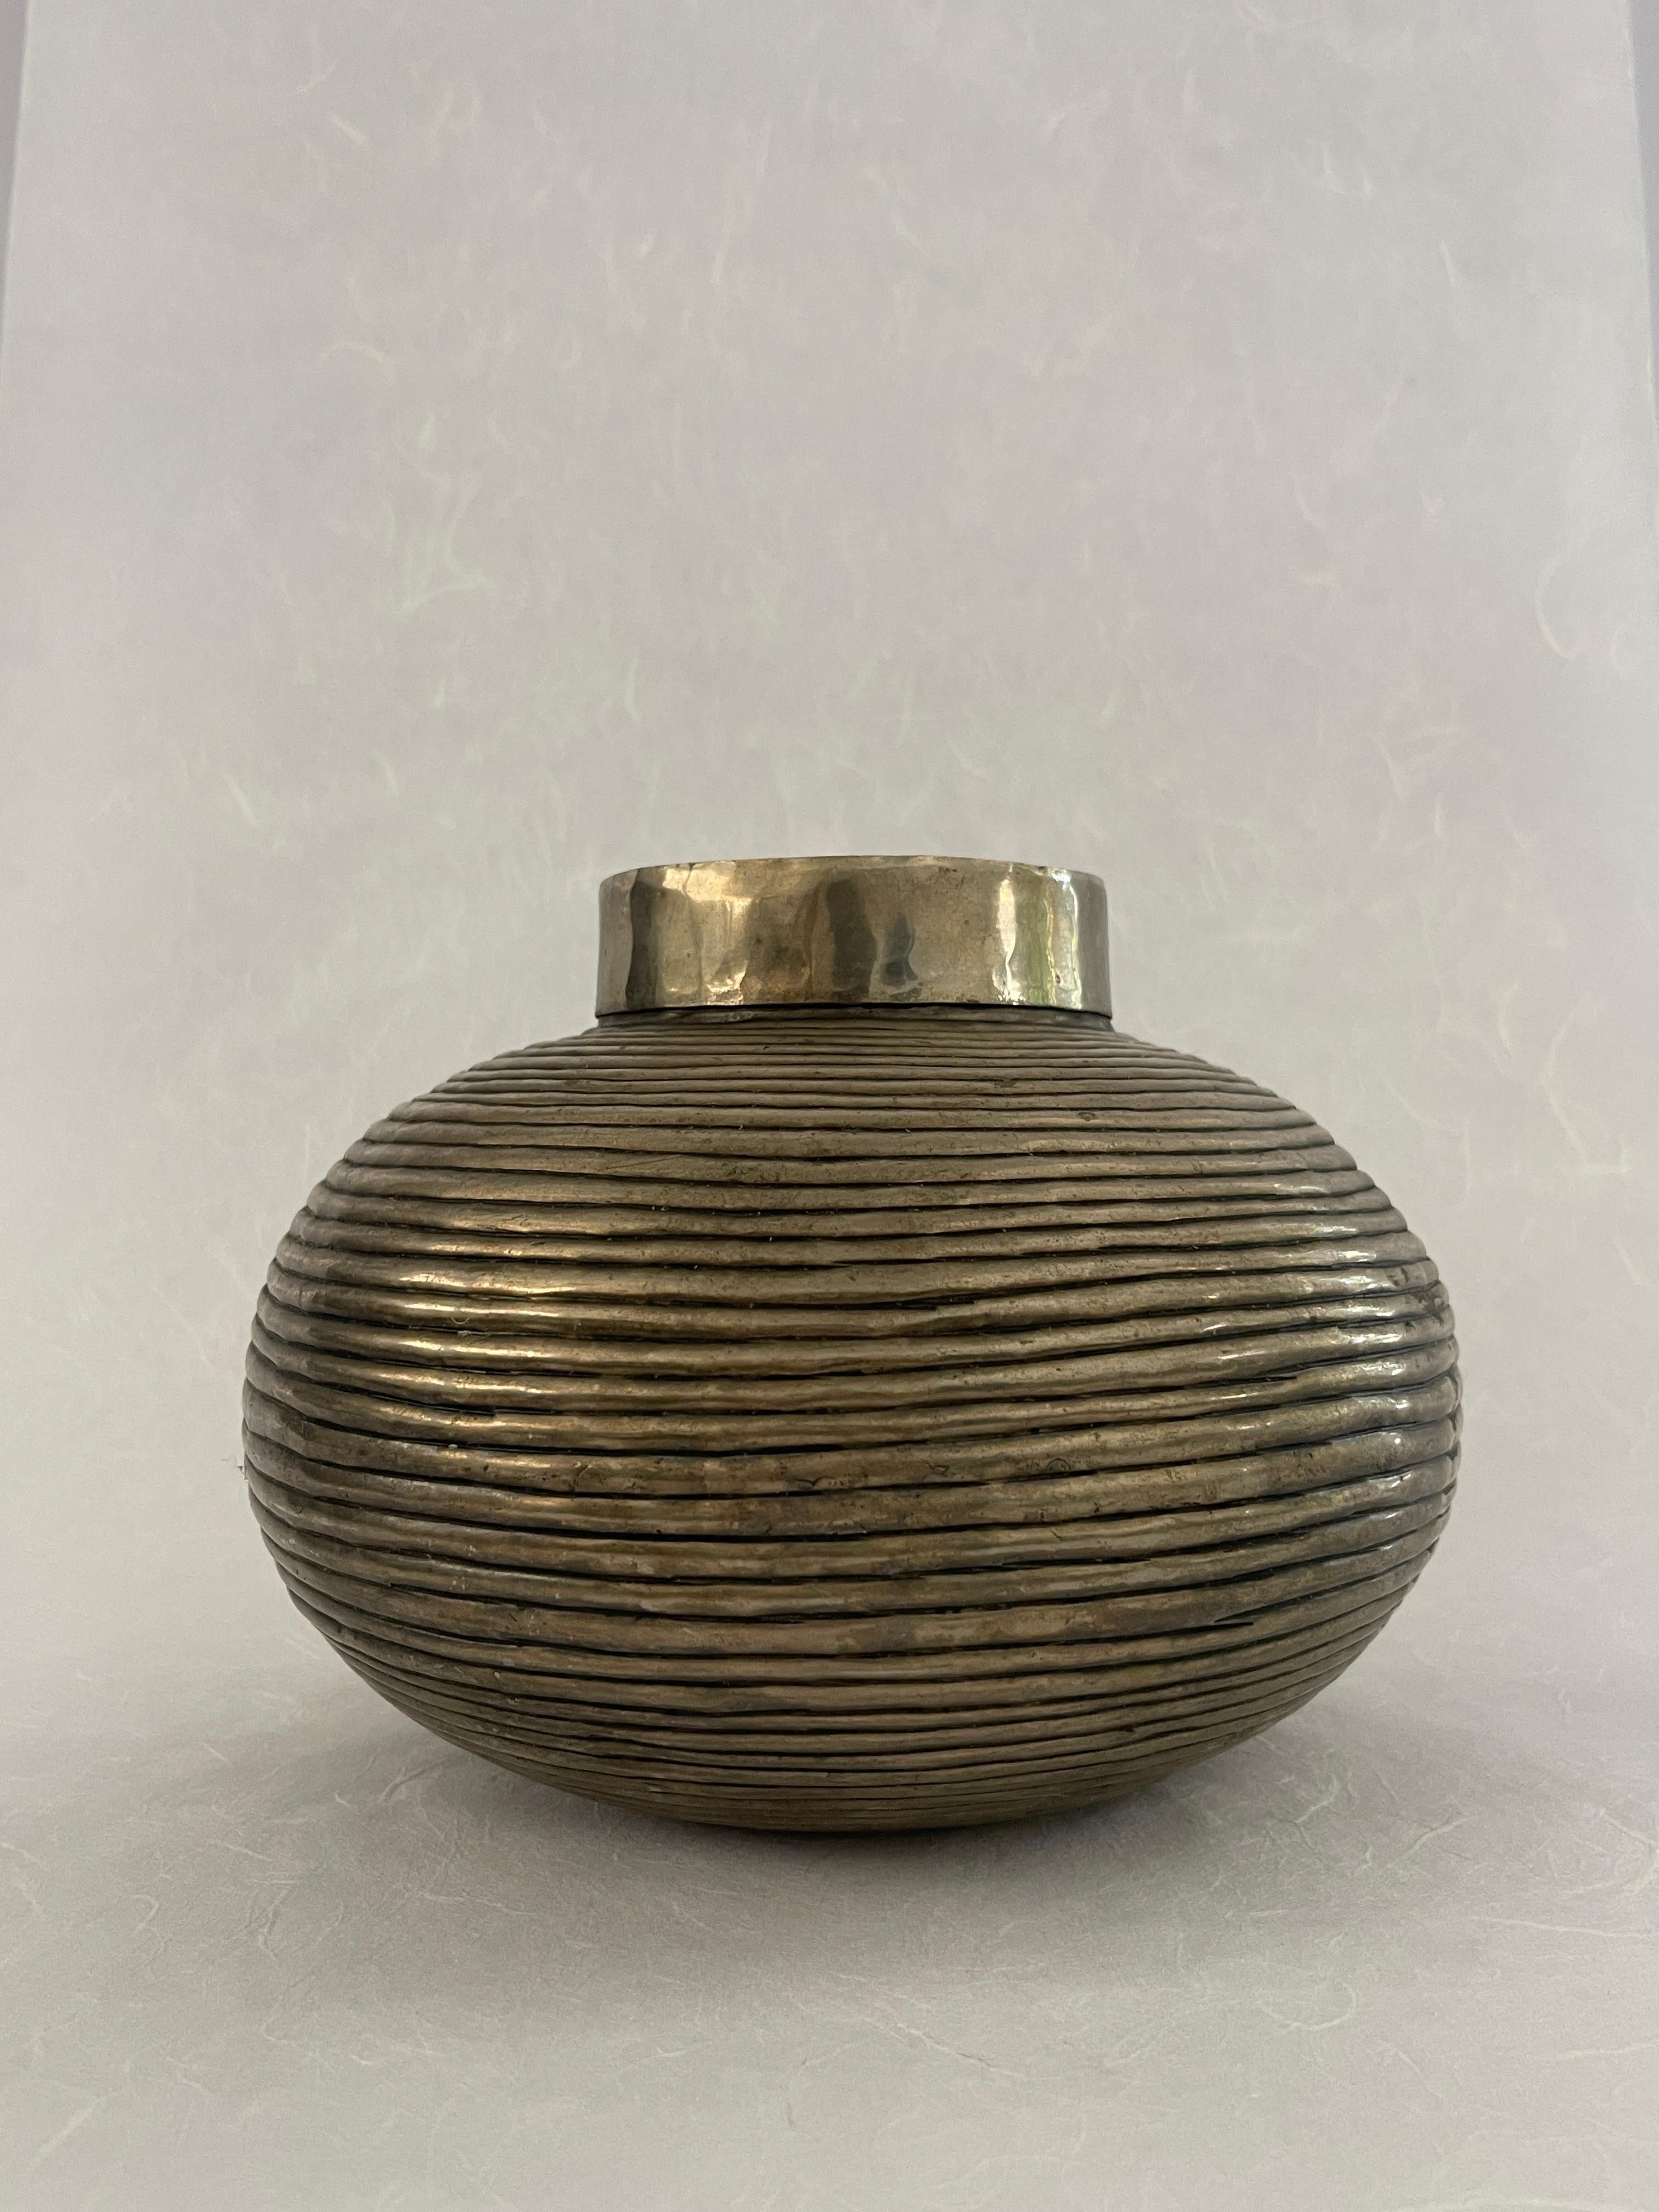 20th Century Hand Crafted Brass Vase with a spherical ribbed body and a cylinder top opening. Unique hand crafted imperfect welded finish between the riblets to give it that brutalist hand done look. 